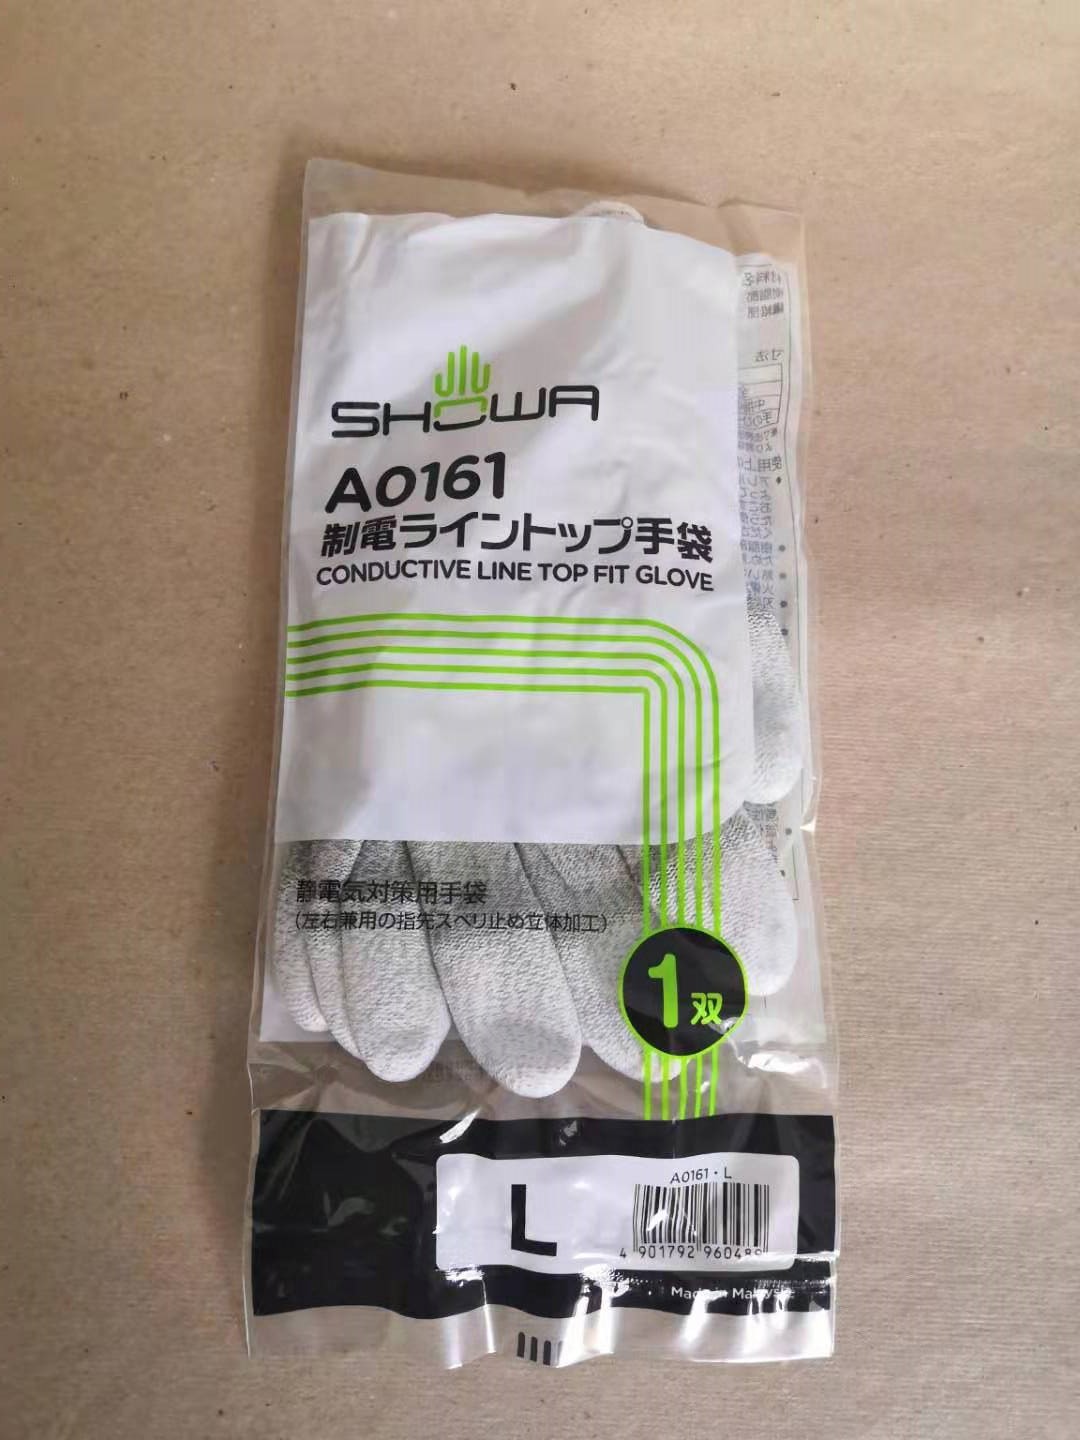 Japan SHOWA original PU finger coating anti-static precision electronic assembly special gloves A0161 L size